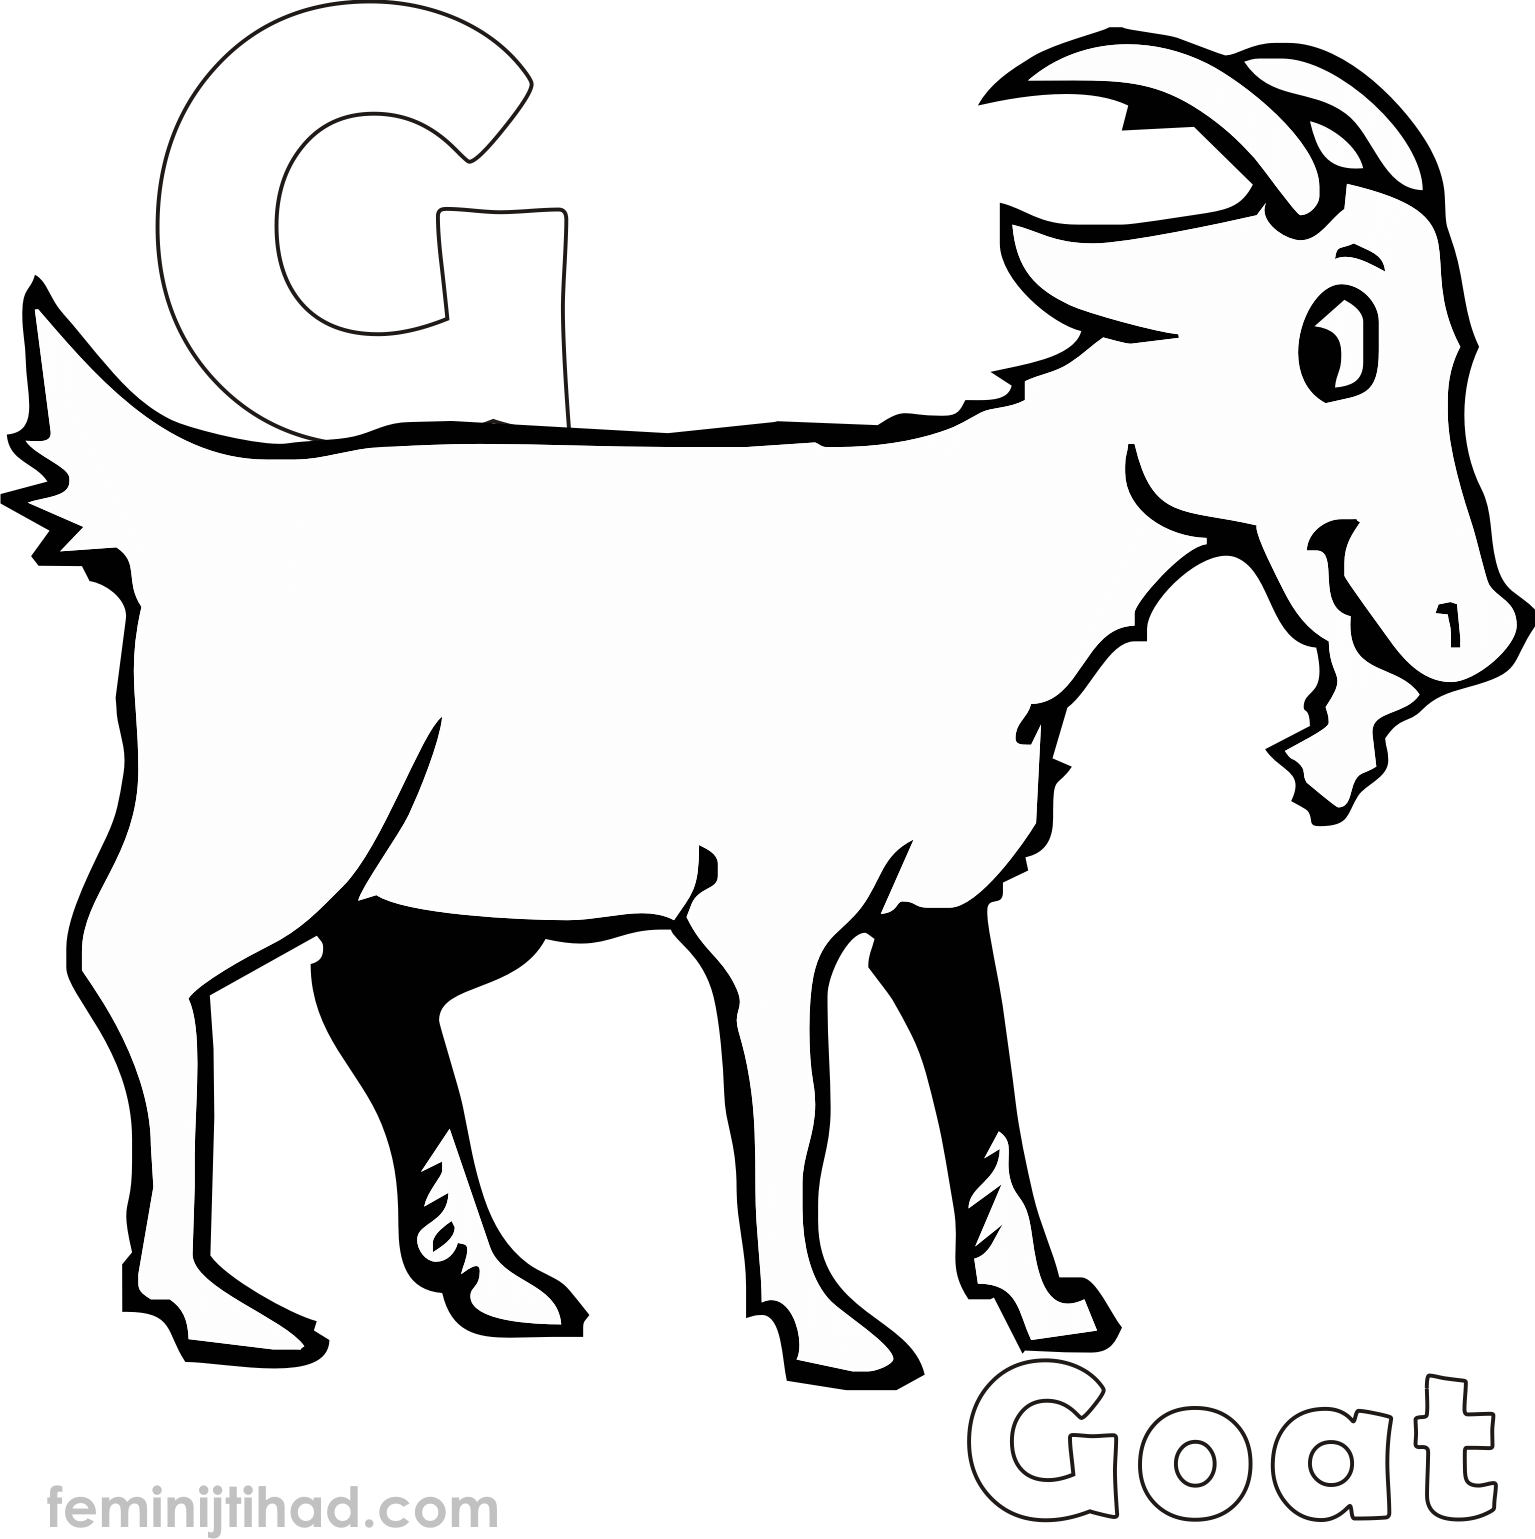 coloring page for goat